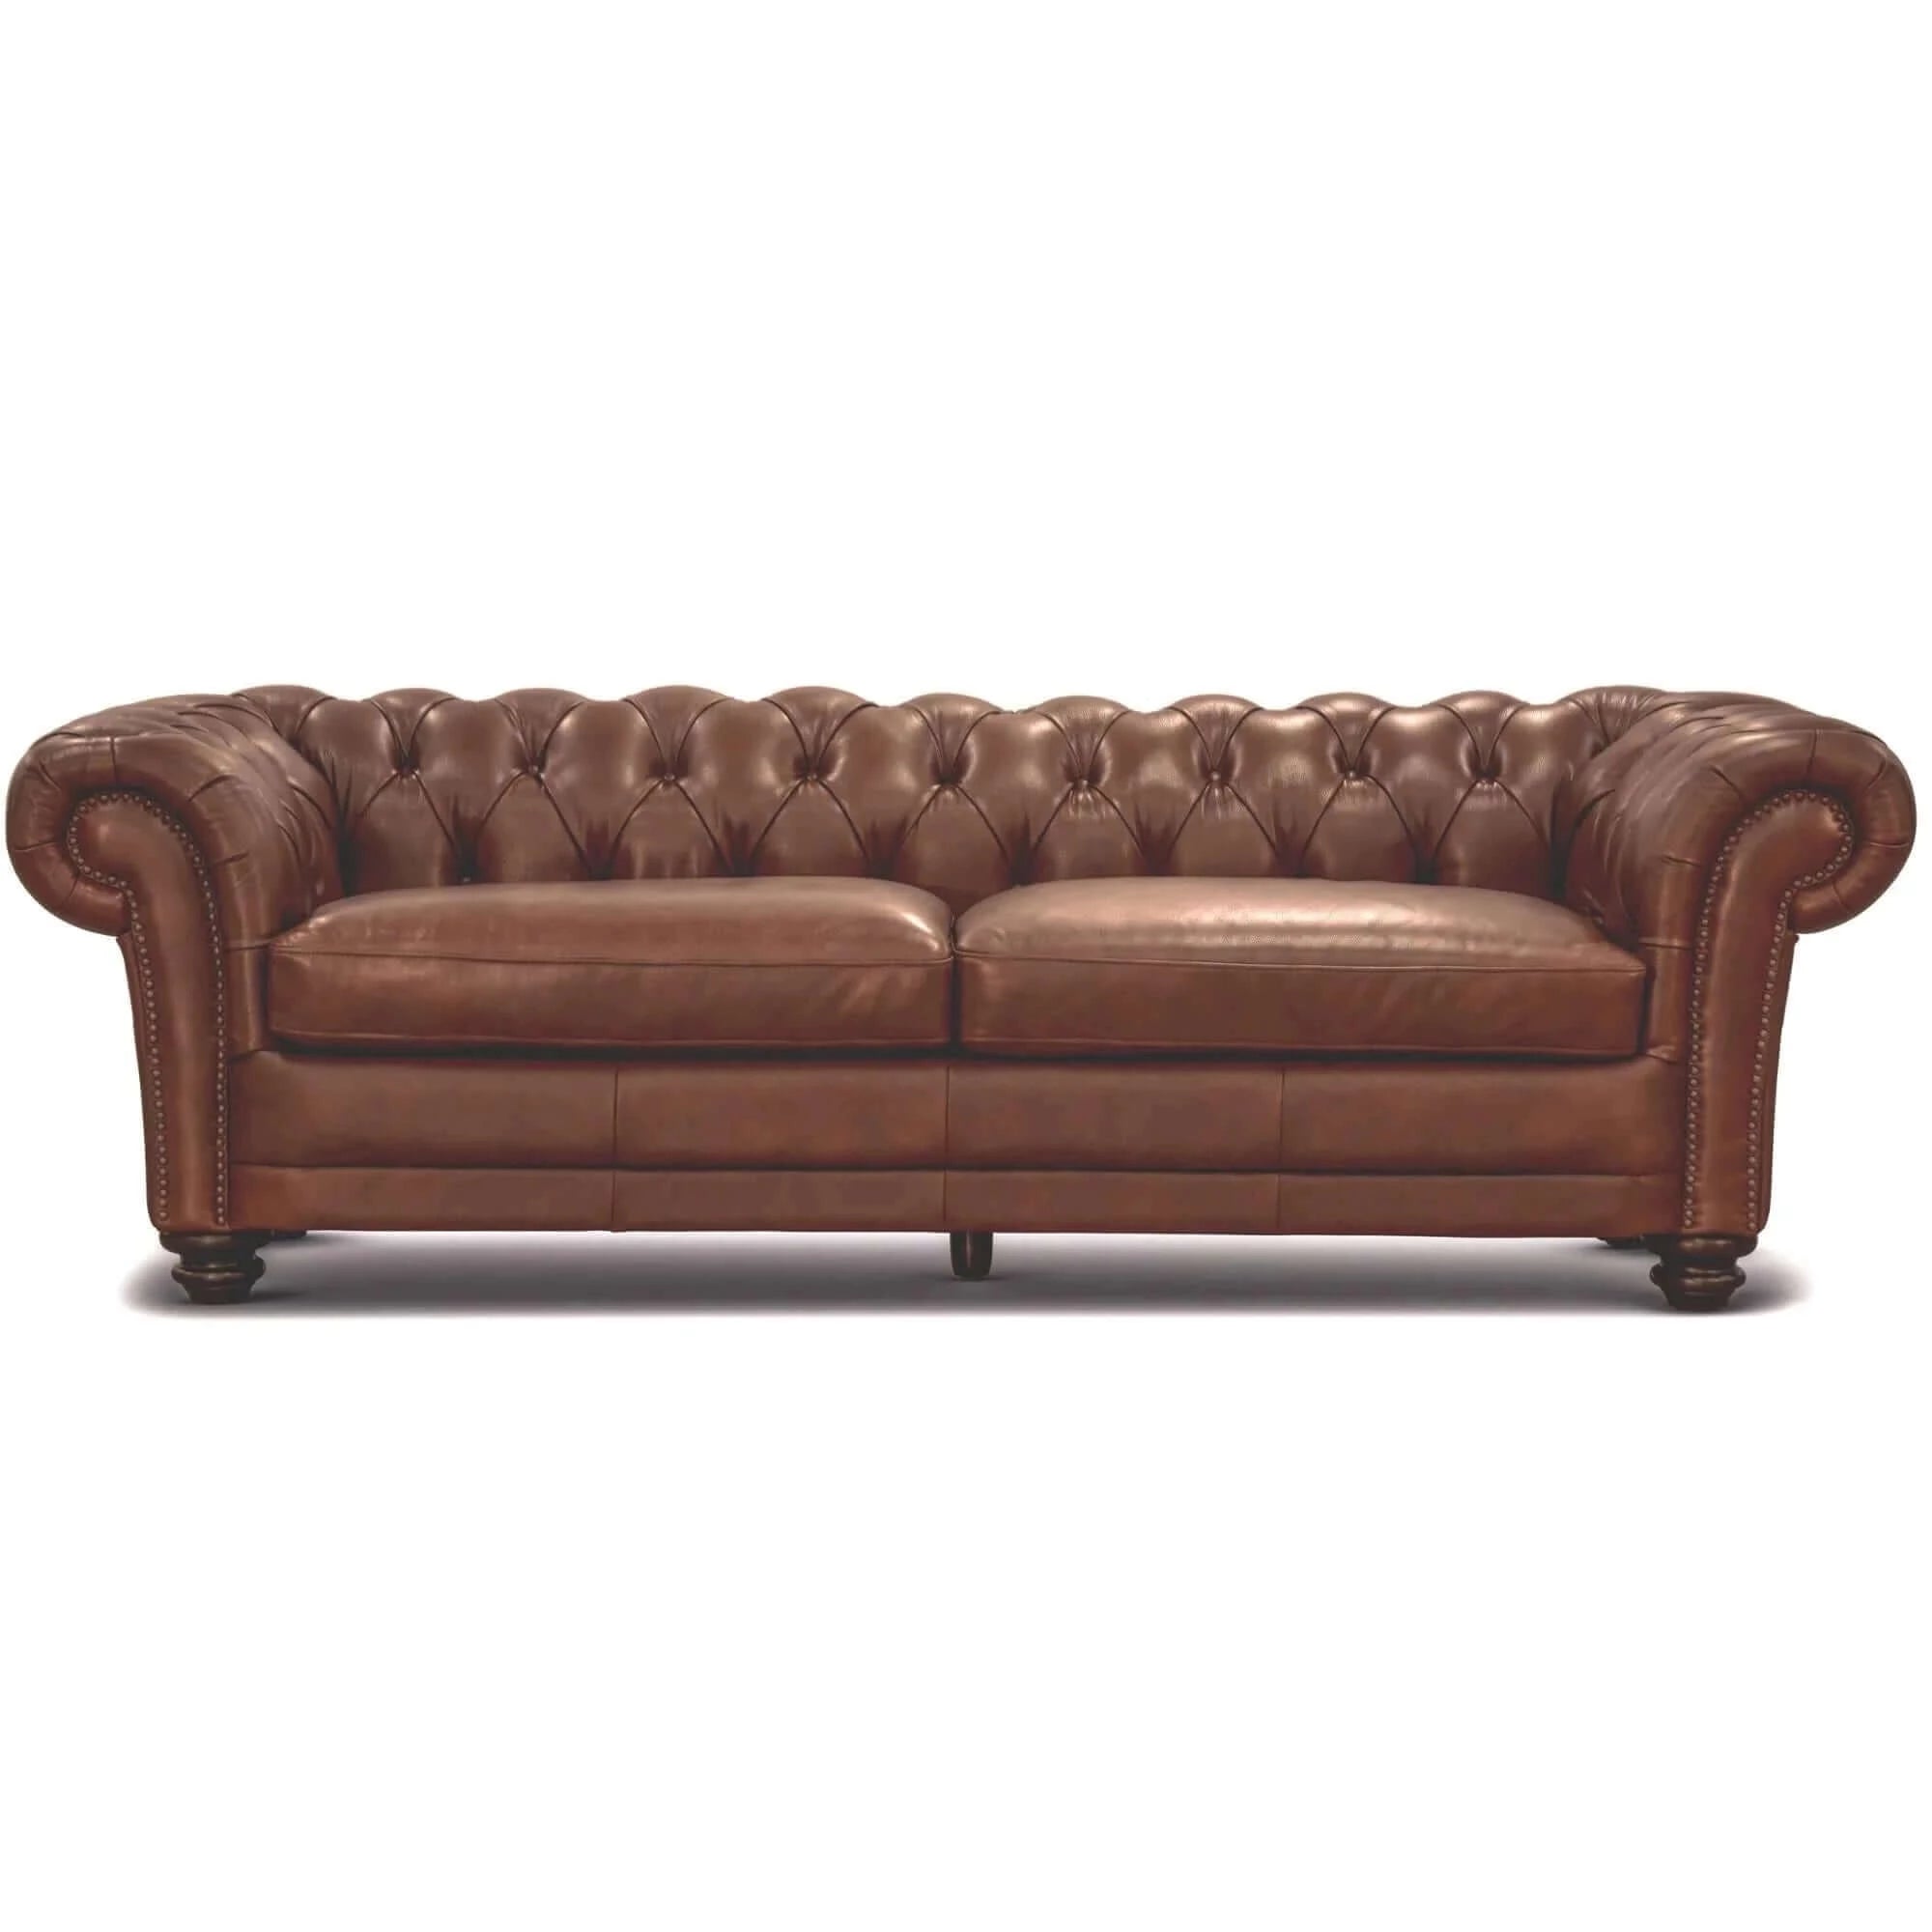 Buy sonny 3 seater genuine leather sofa chestfield lounge couch - butterscotch - upinteriors-Upinteriors